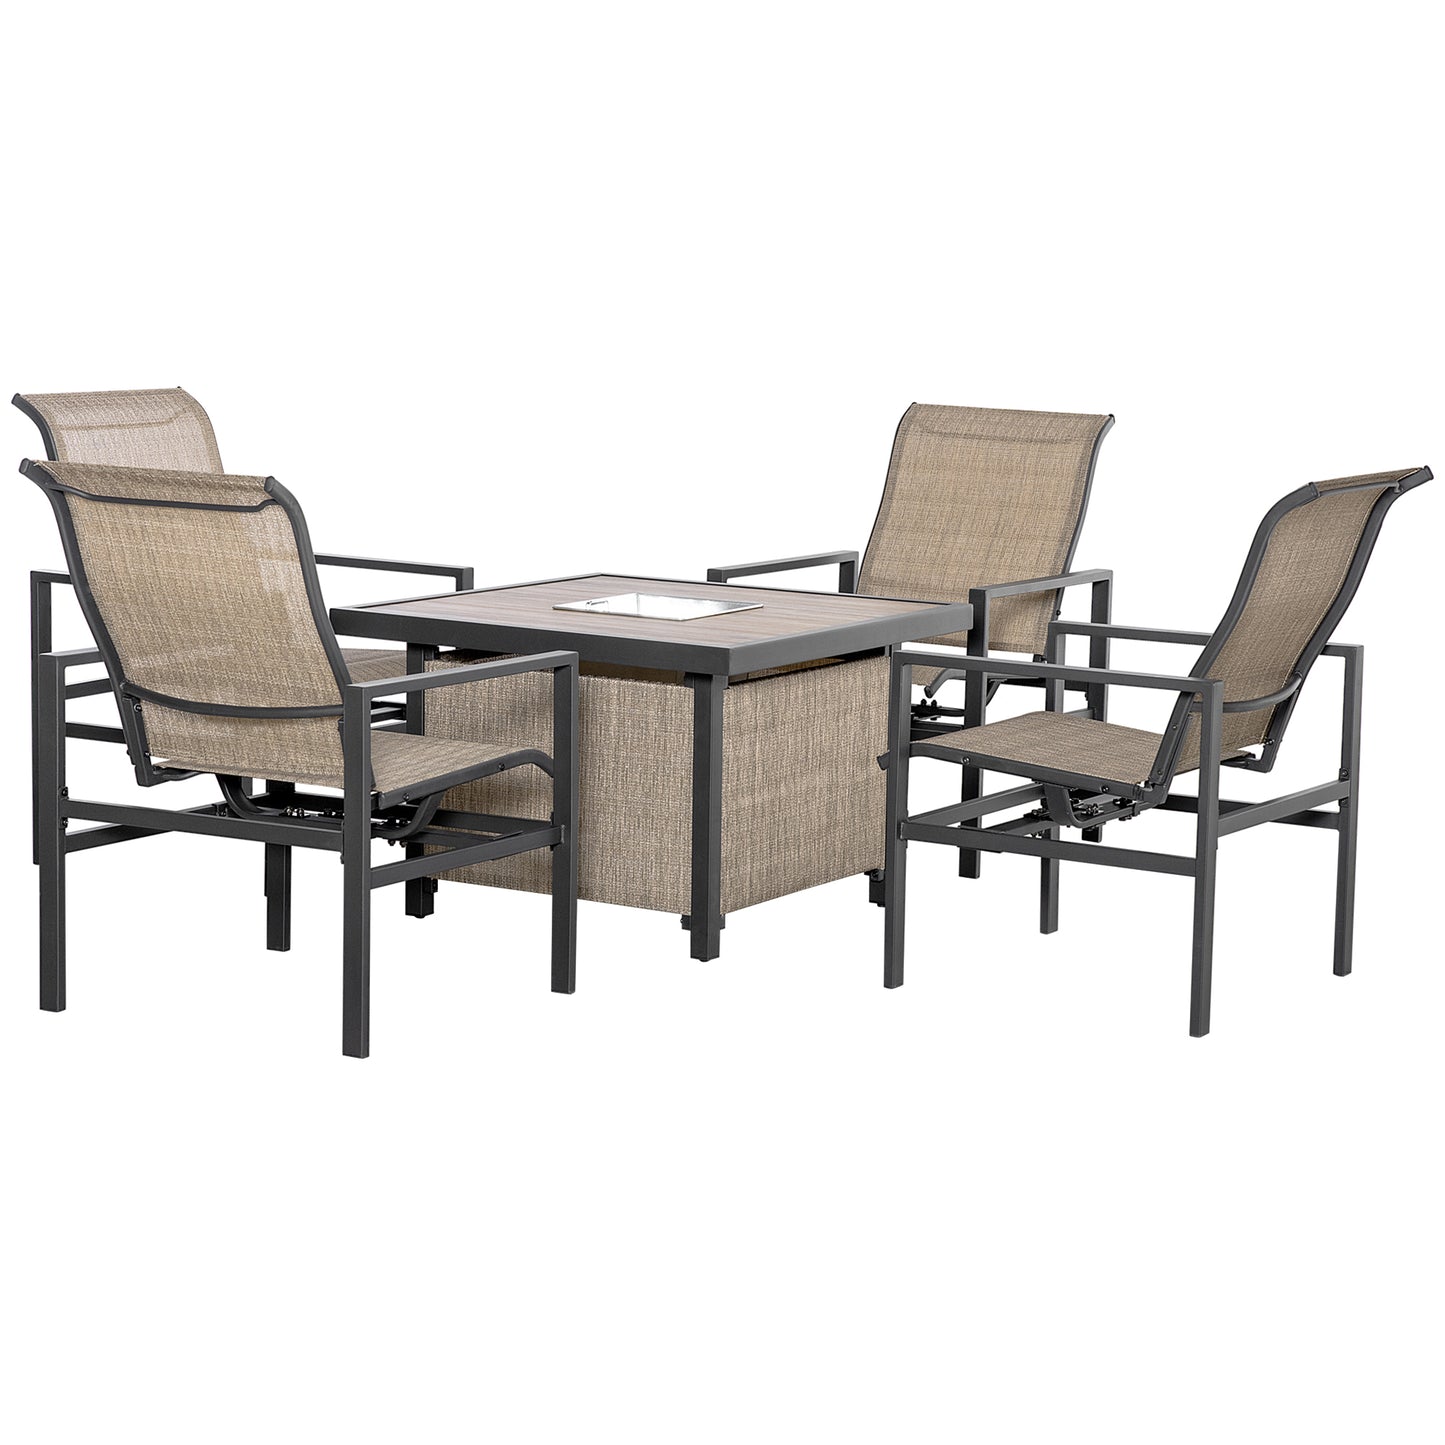 Outsunny 5 Piece Outdoor Seating Set with Ice Bucket